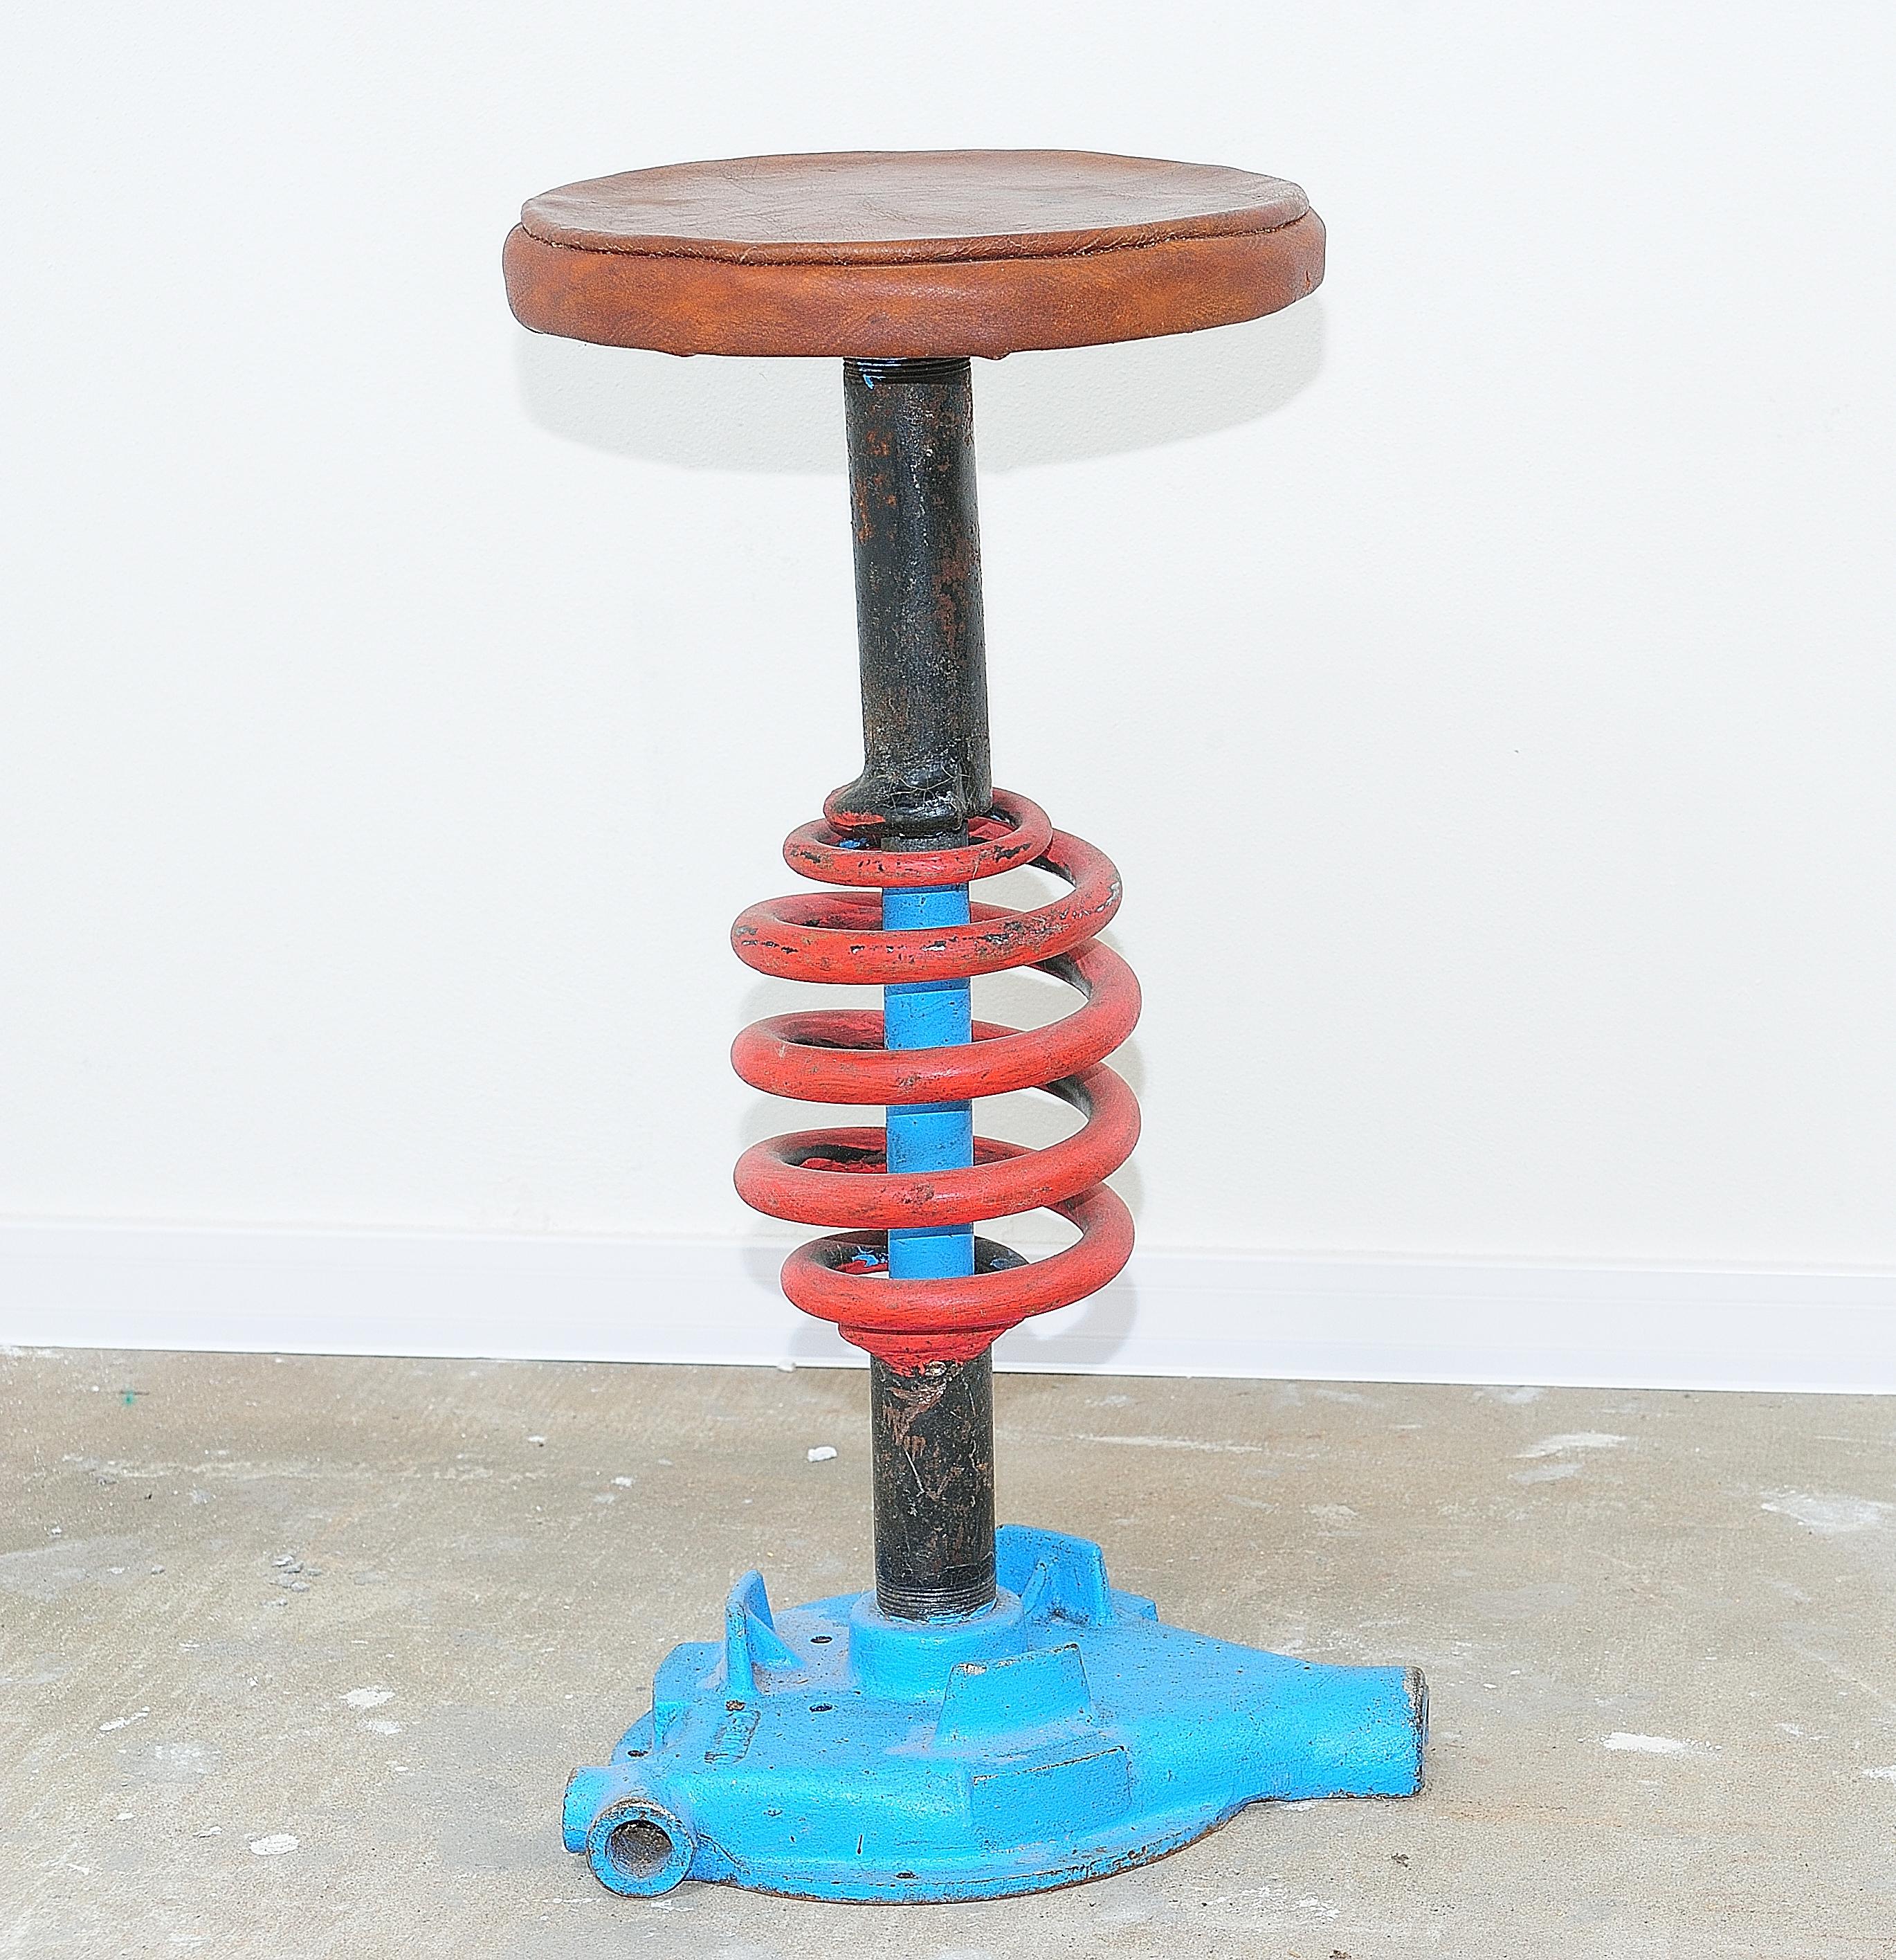 Czechoslovak vintage Industrial stool, made in the 1970s. It features an unconventional design. It was made of iron and leather. In good preserved vintage condition, signs of time and wear create an interesting and engaging patina to this piece.